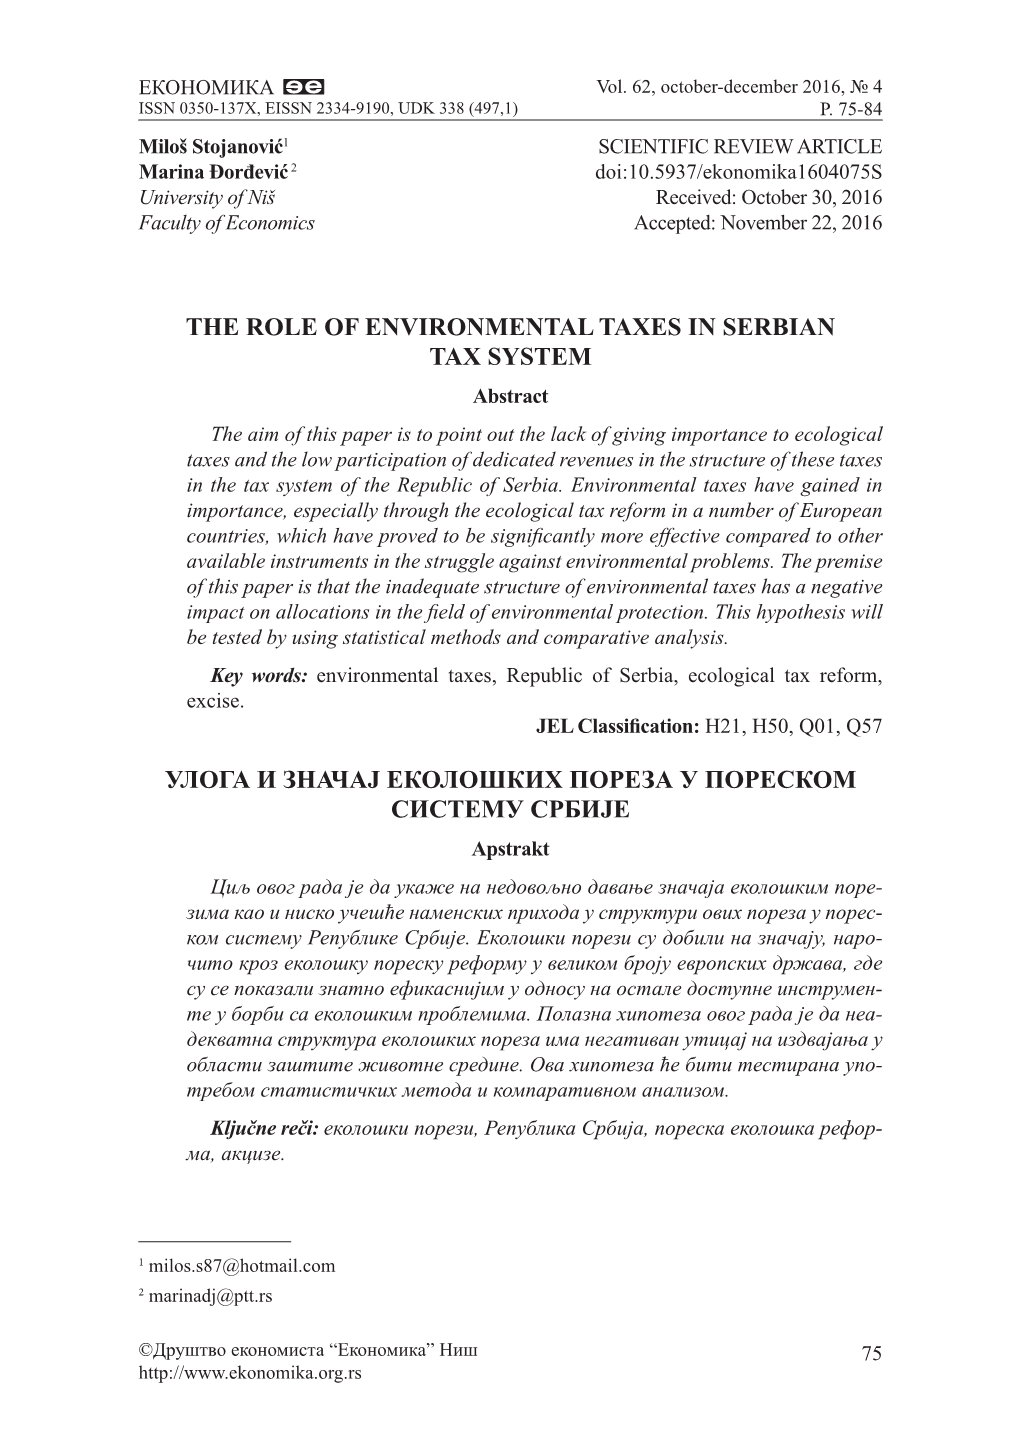 The Role of Environmental Taxes in Serbian Tax System